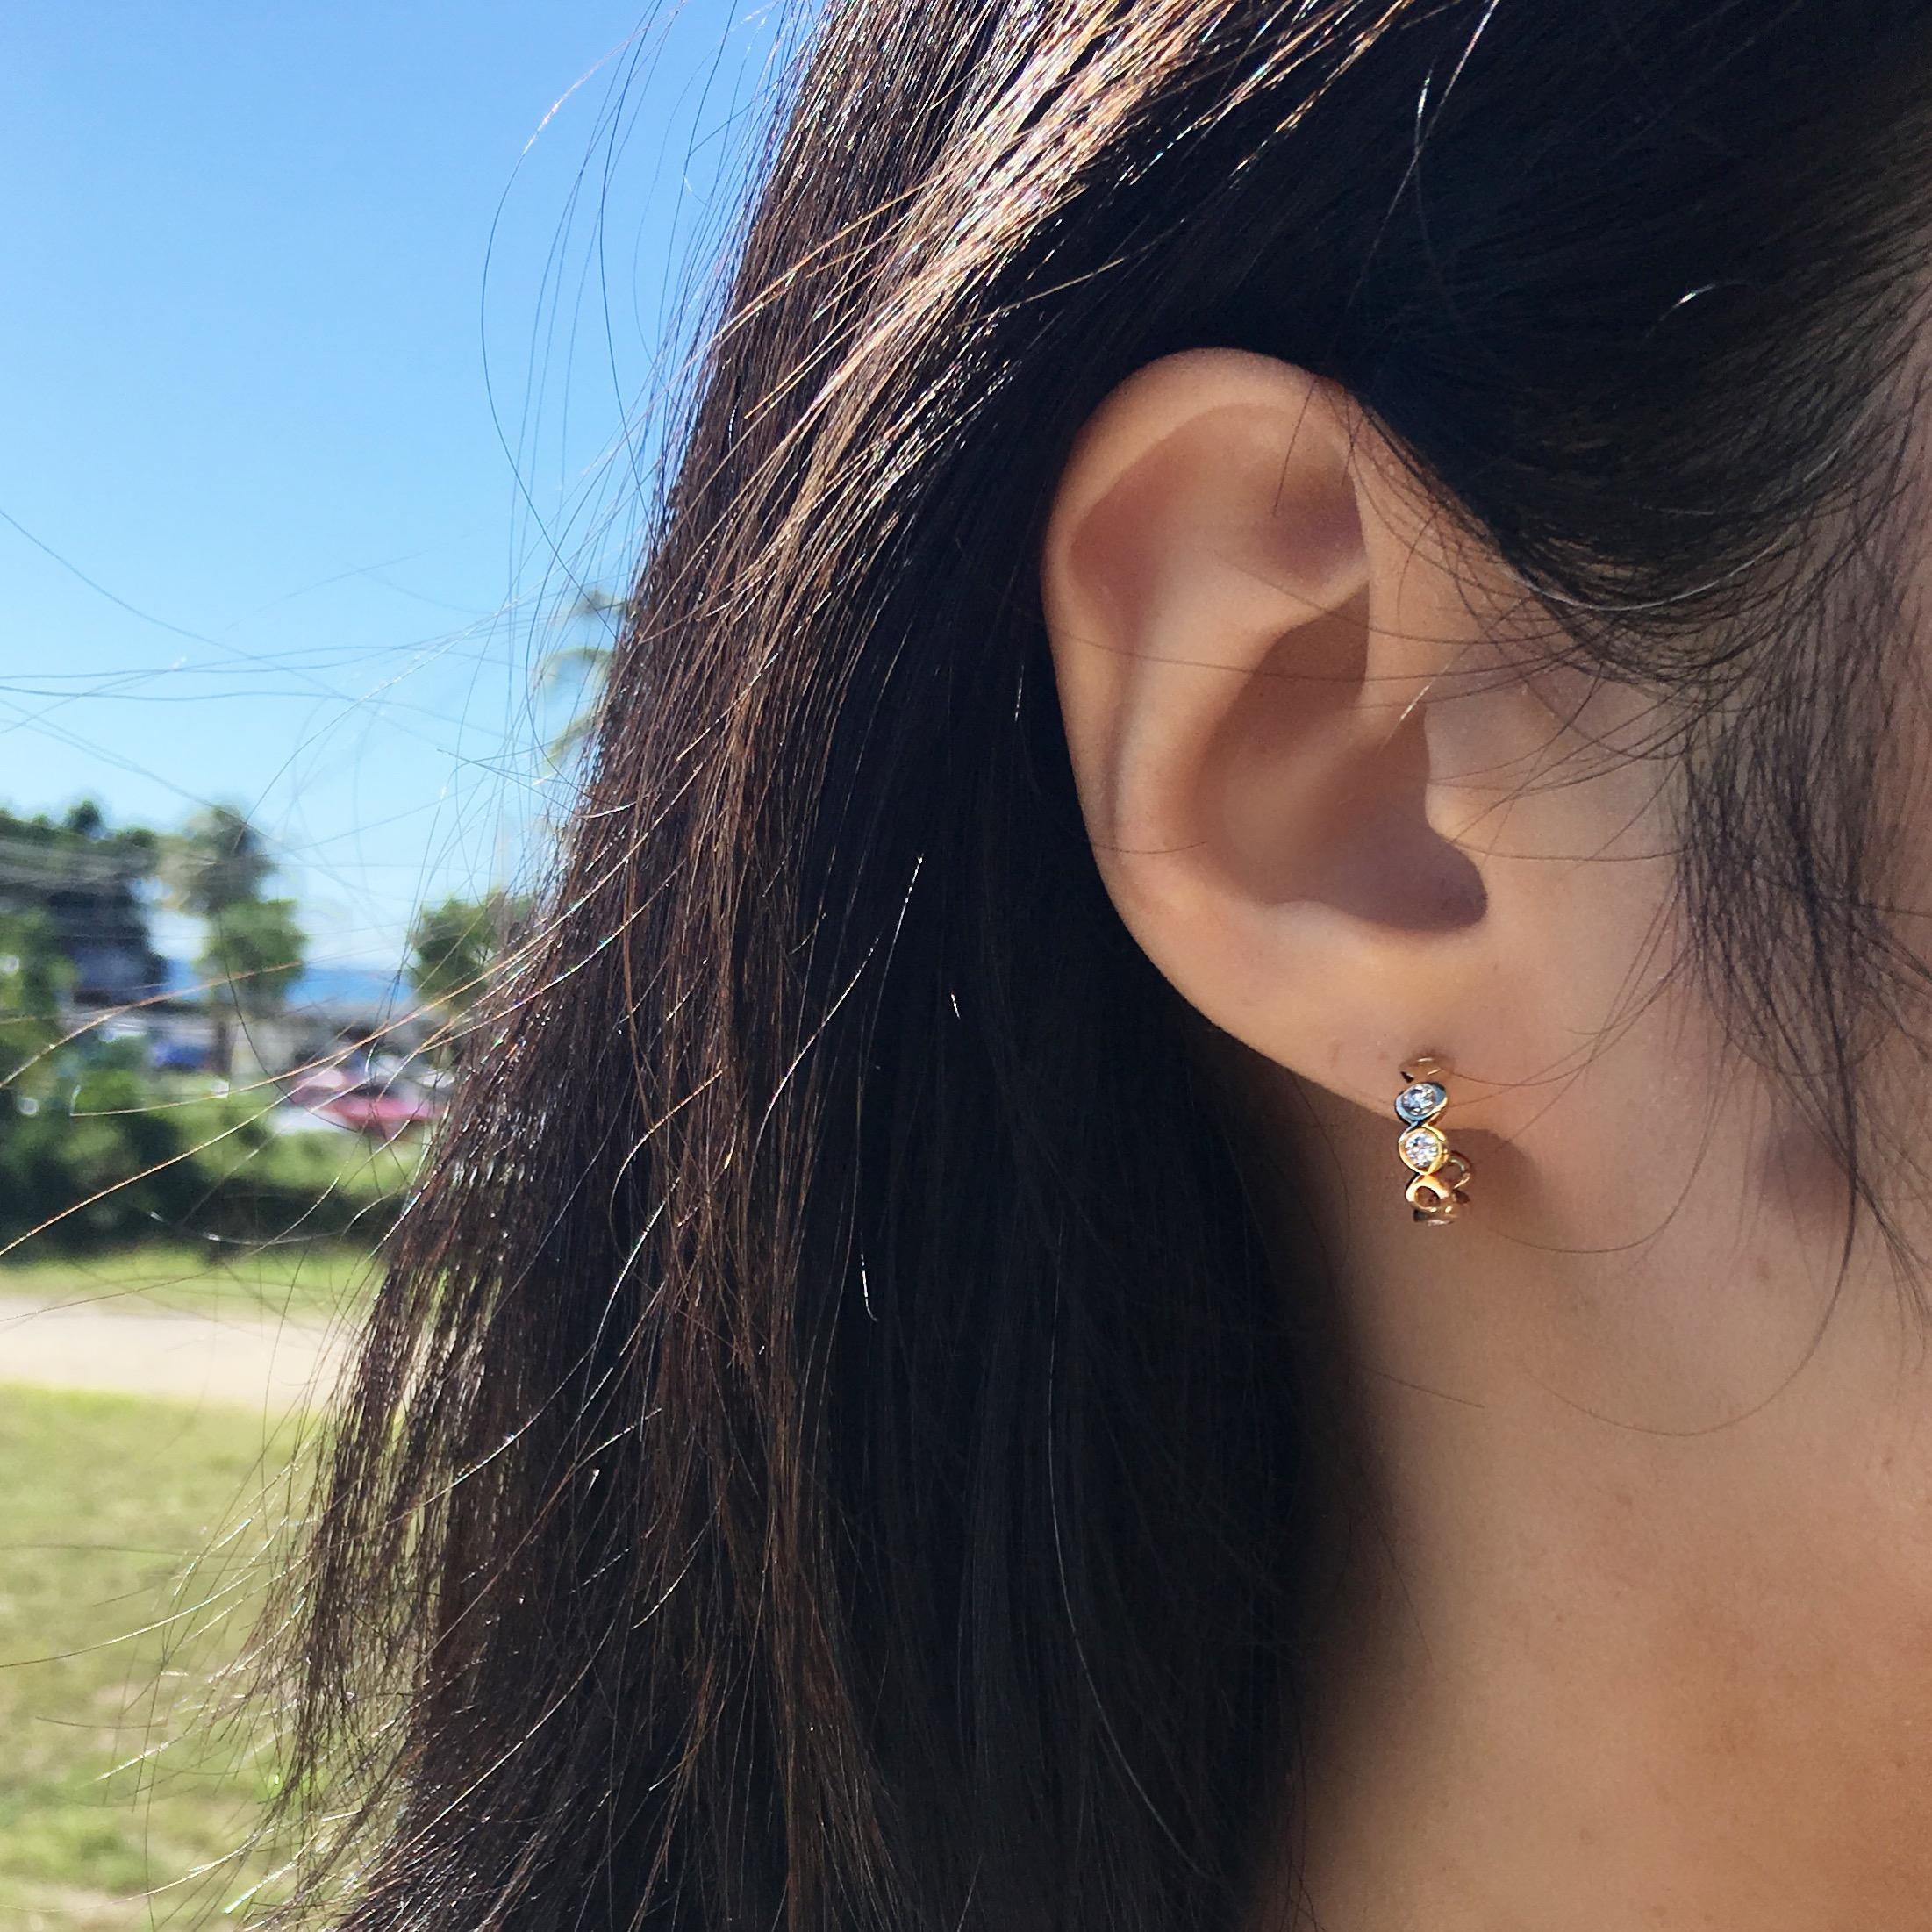 These diamond small hoop earrings are easy-to-wear diamond huggie hoops that can be worn everyday with your hair up or down.
Three pieces of diamonds are set into Hi June Parker's signature Organic circular elements on each huggie, just enough to